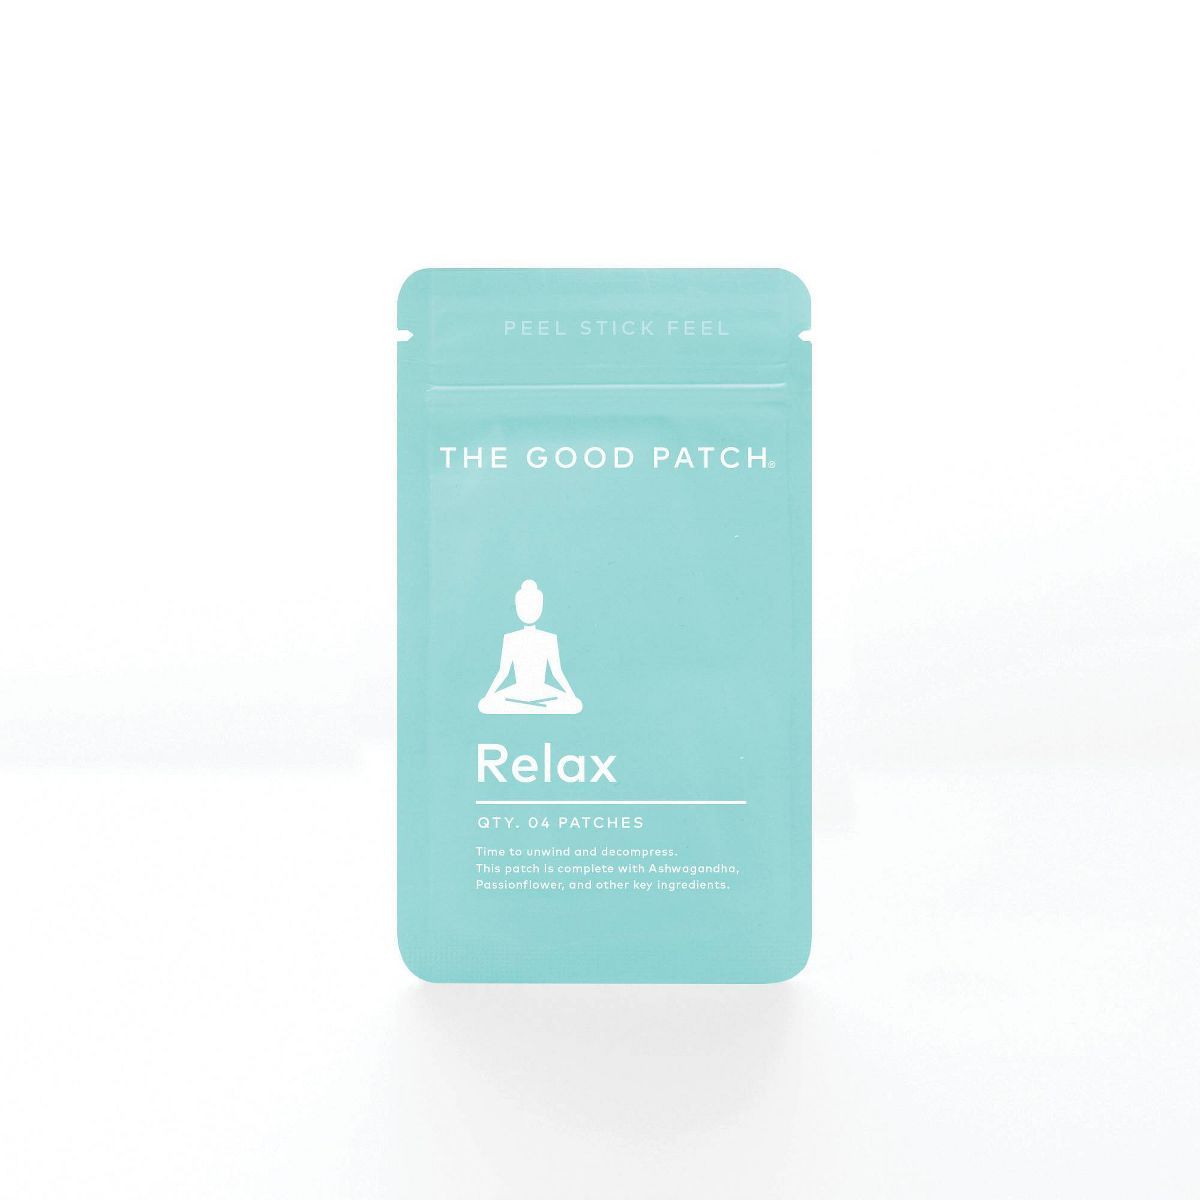 The Good Patch Relax Plant-Based Vegan Wellness Patch - 4ct | Target